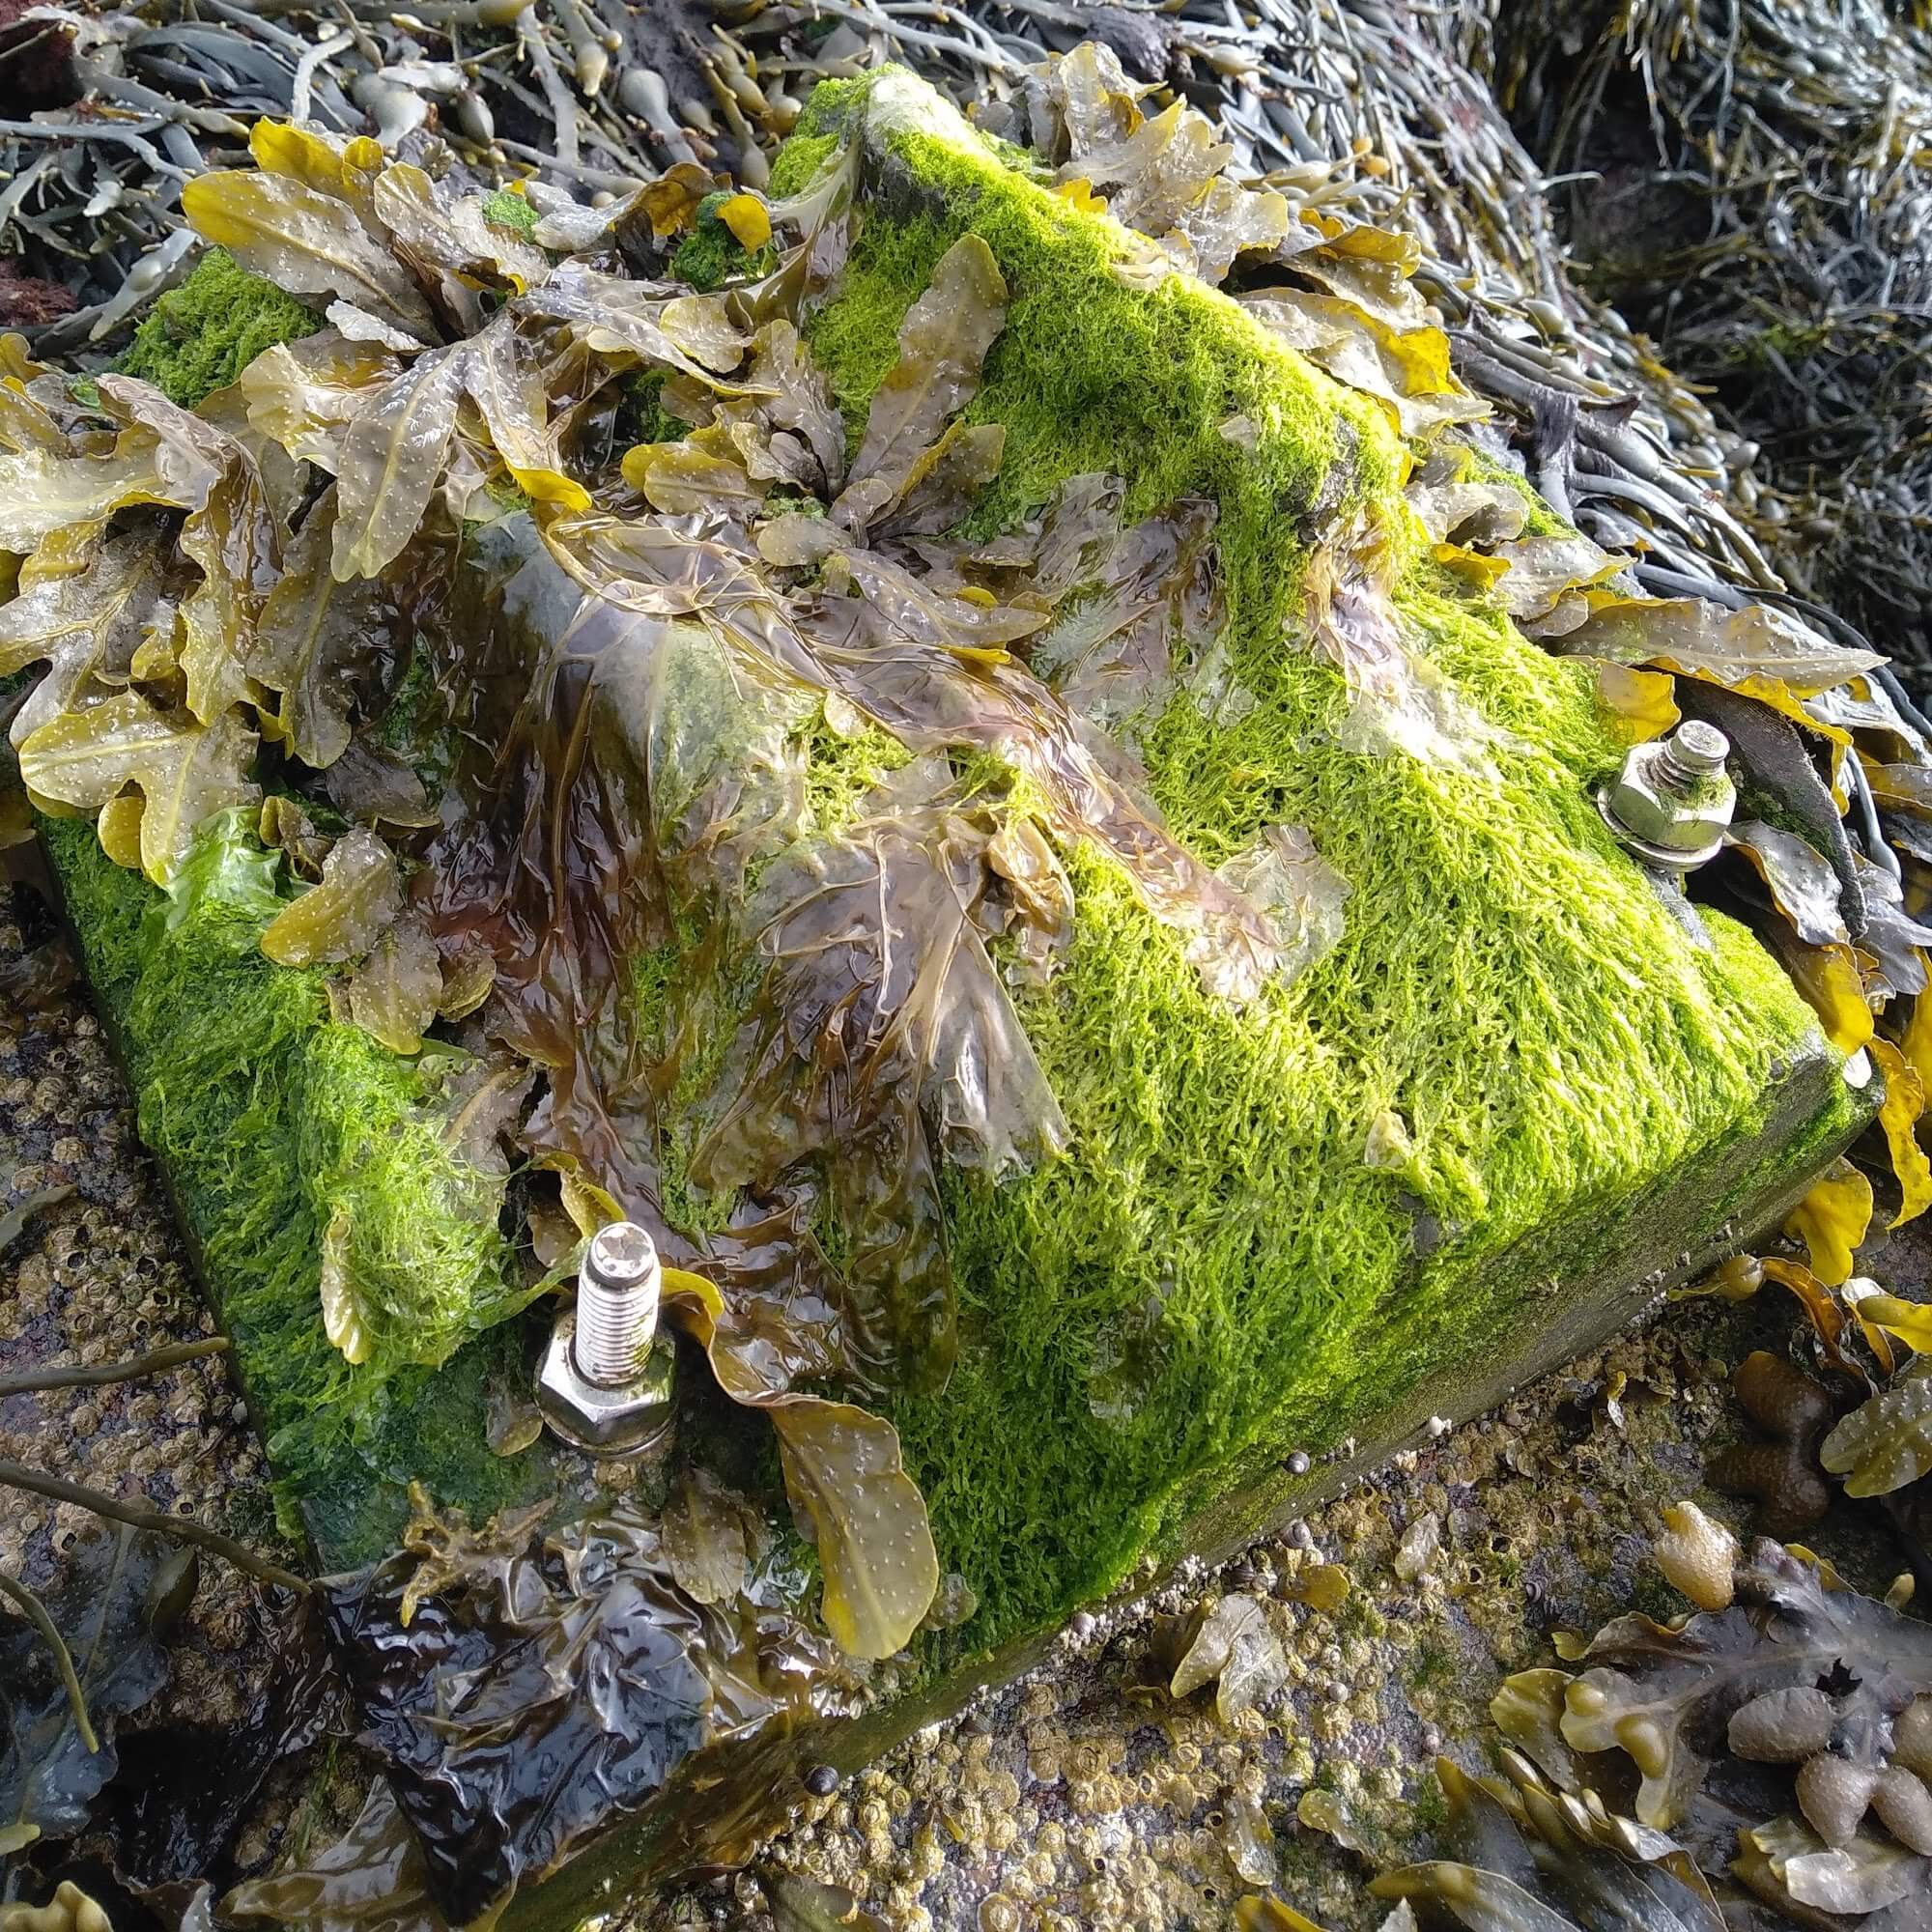 An eco-engineering experimental tile installed by Ecostructure project researchers shows colonisation by bladder wrack and other marine species.